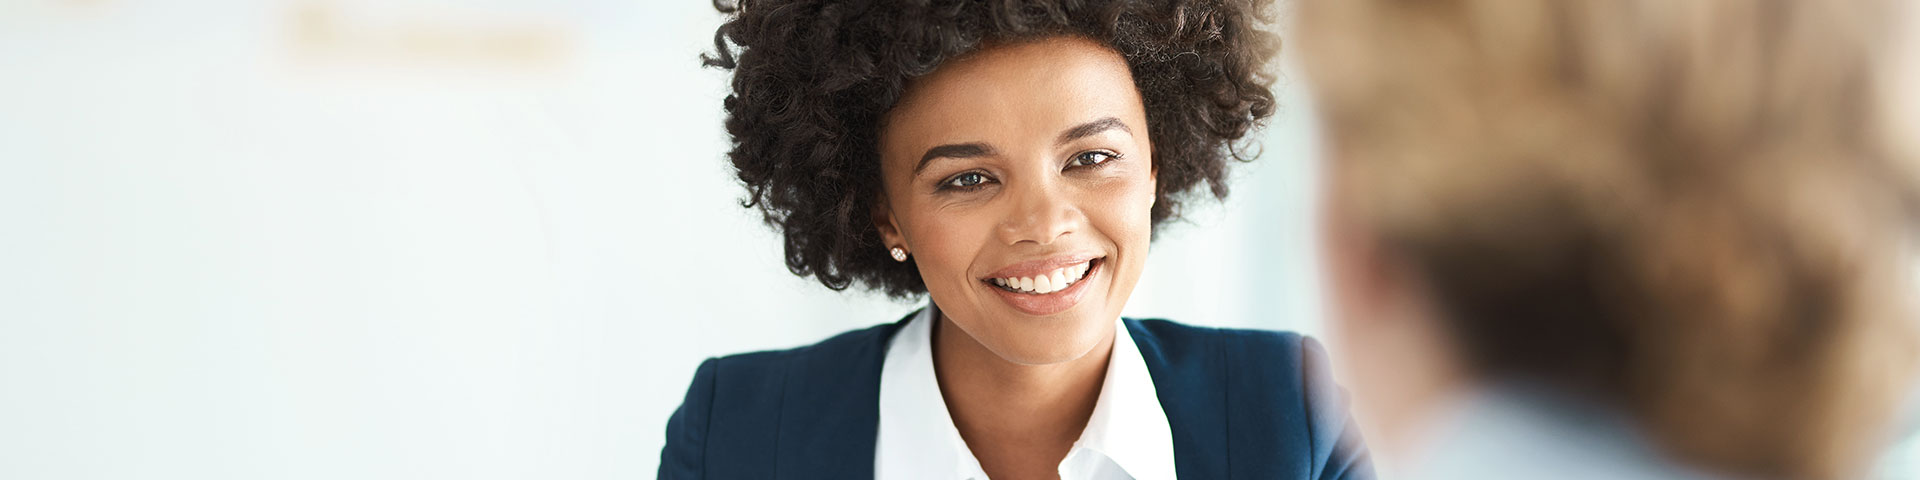 Woman smiling and talking